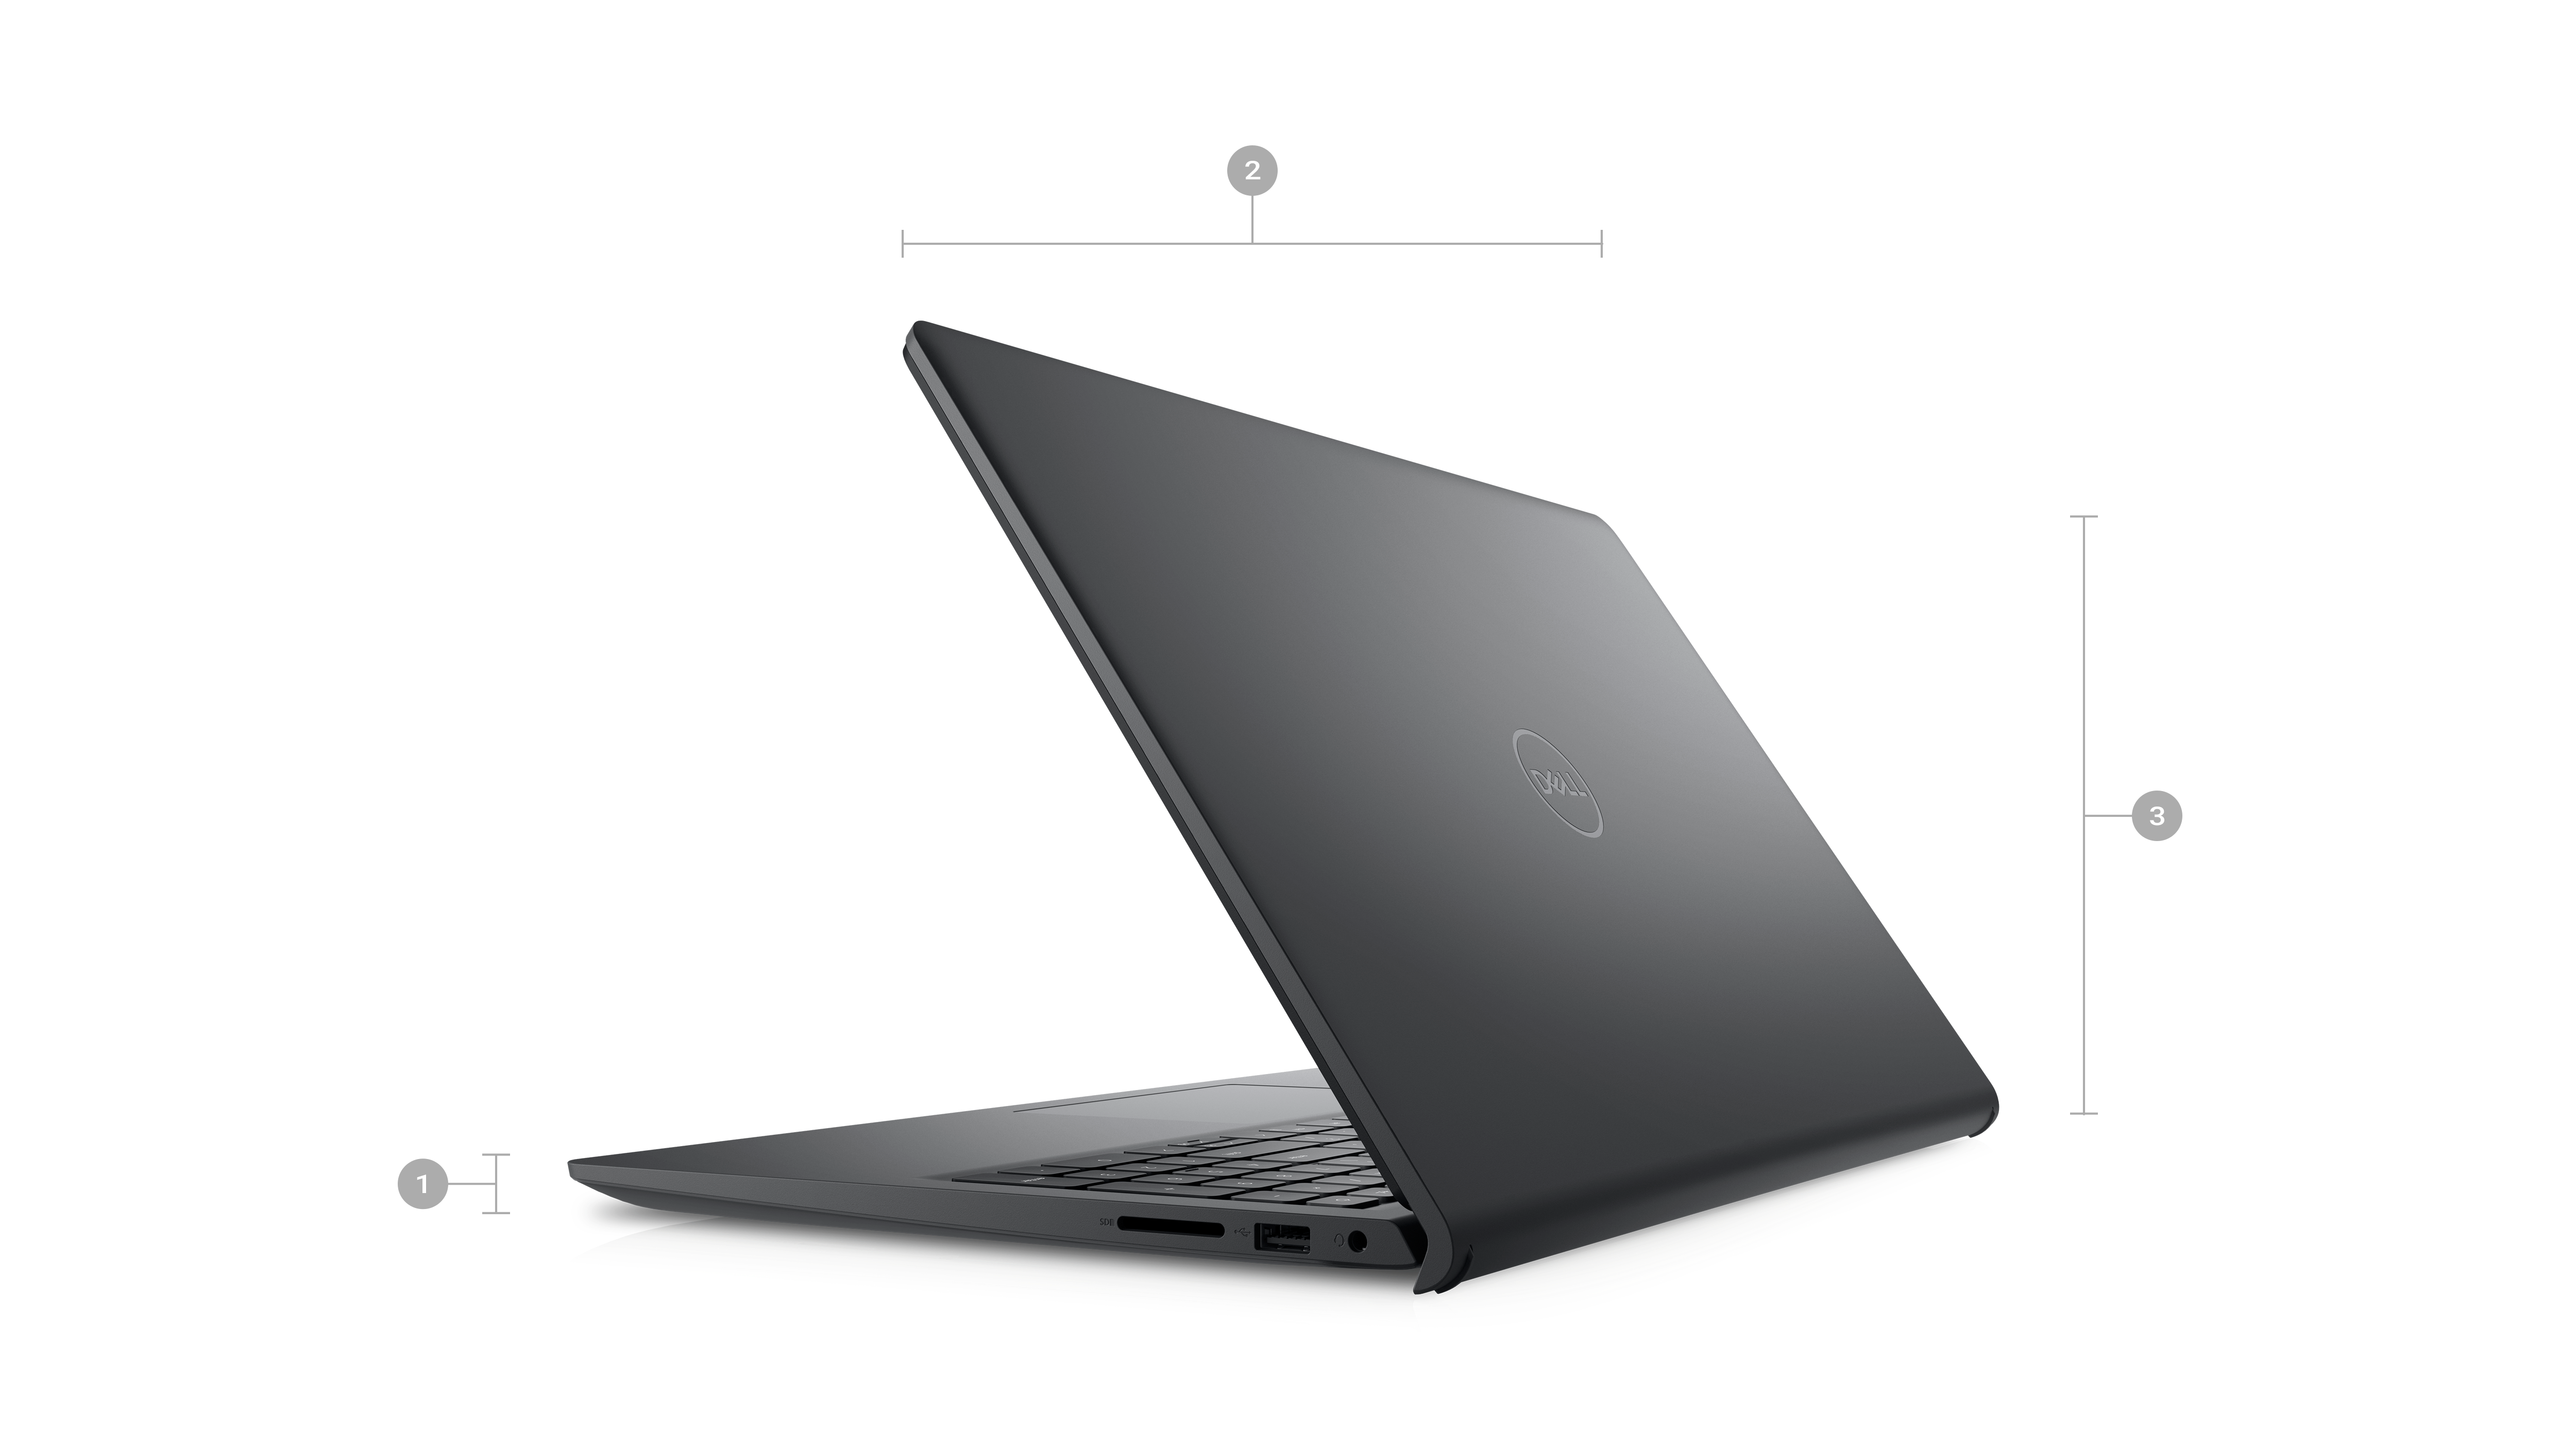 Picture of a Dell Inspiron 15 3520 laptop with its back visible and numbers from 1 to 3 signaling product dimensions & weight.